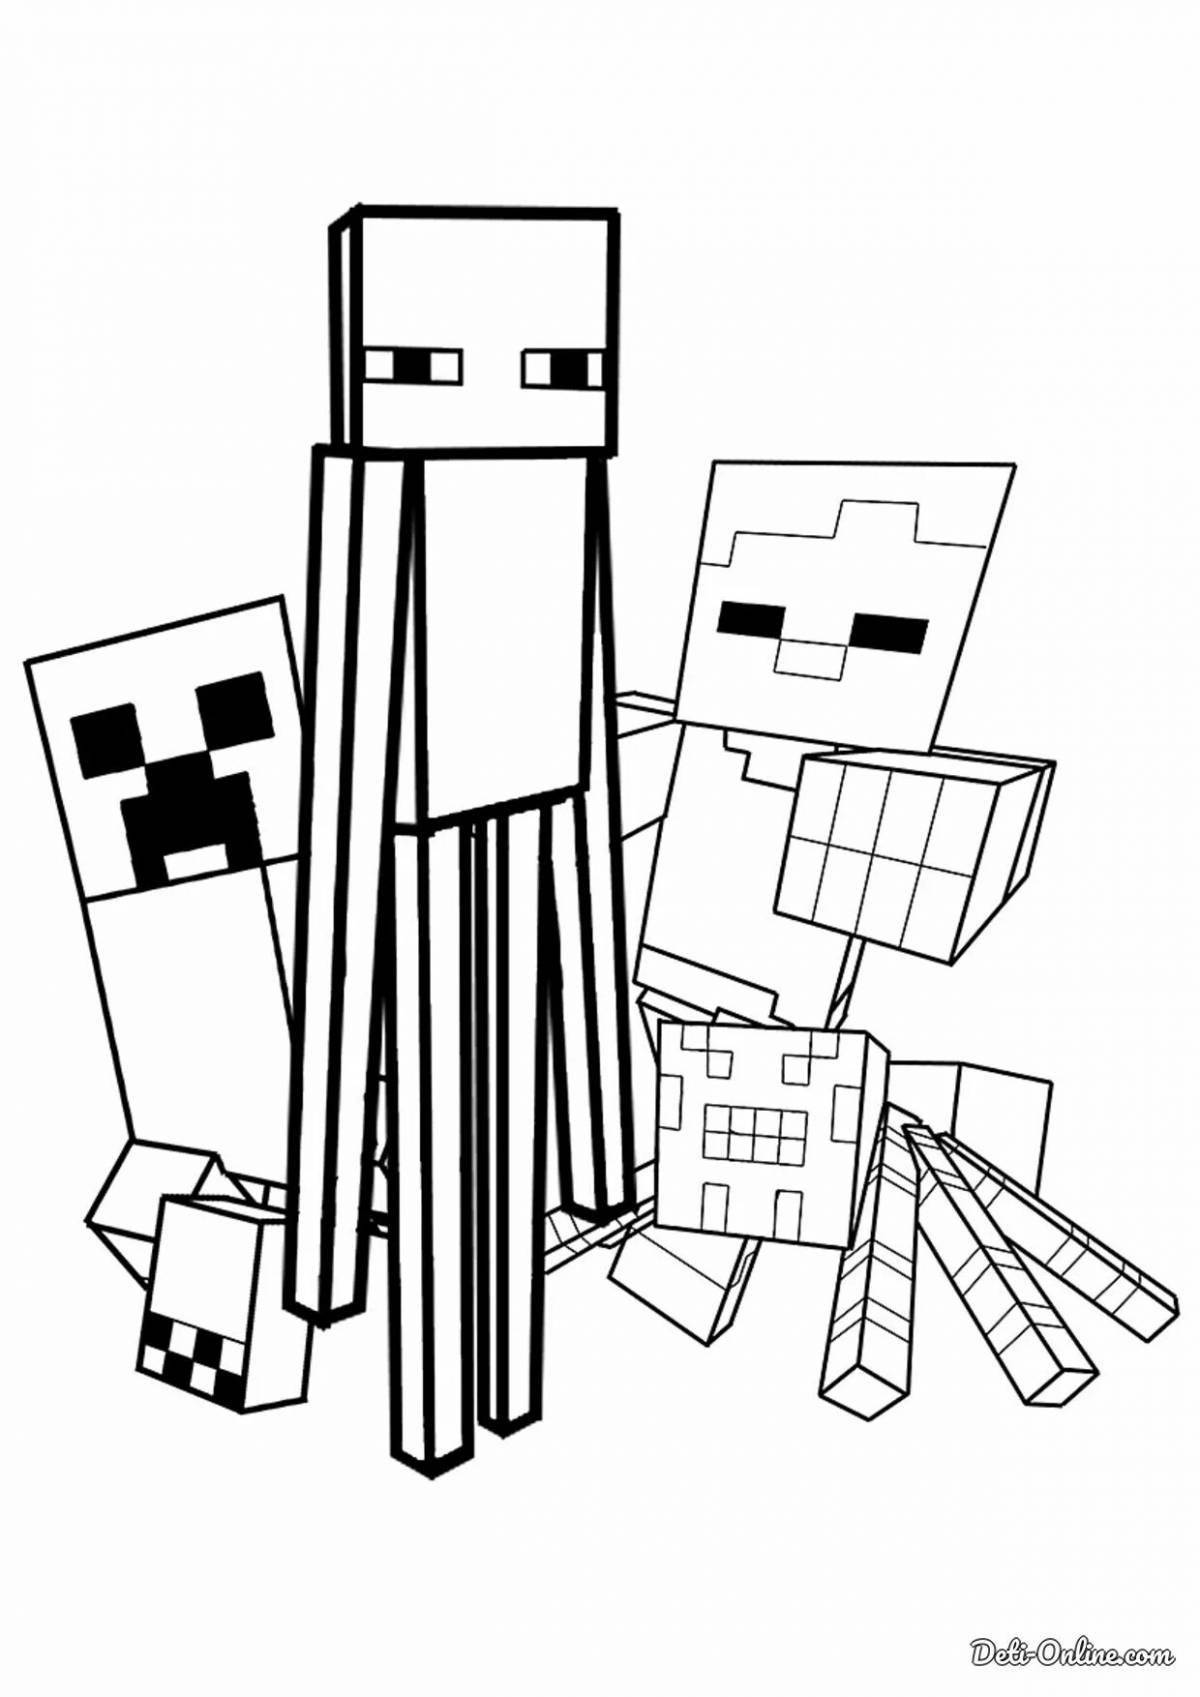 Minecraft fun coloring page all mobs